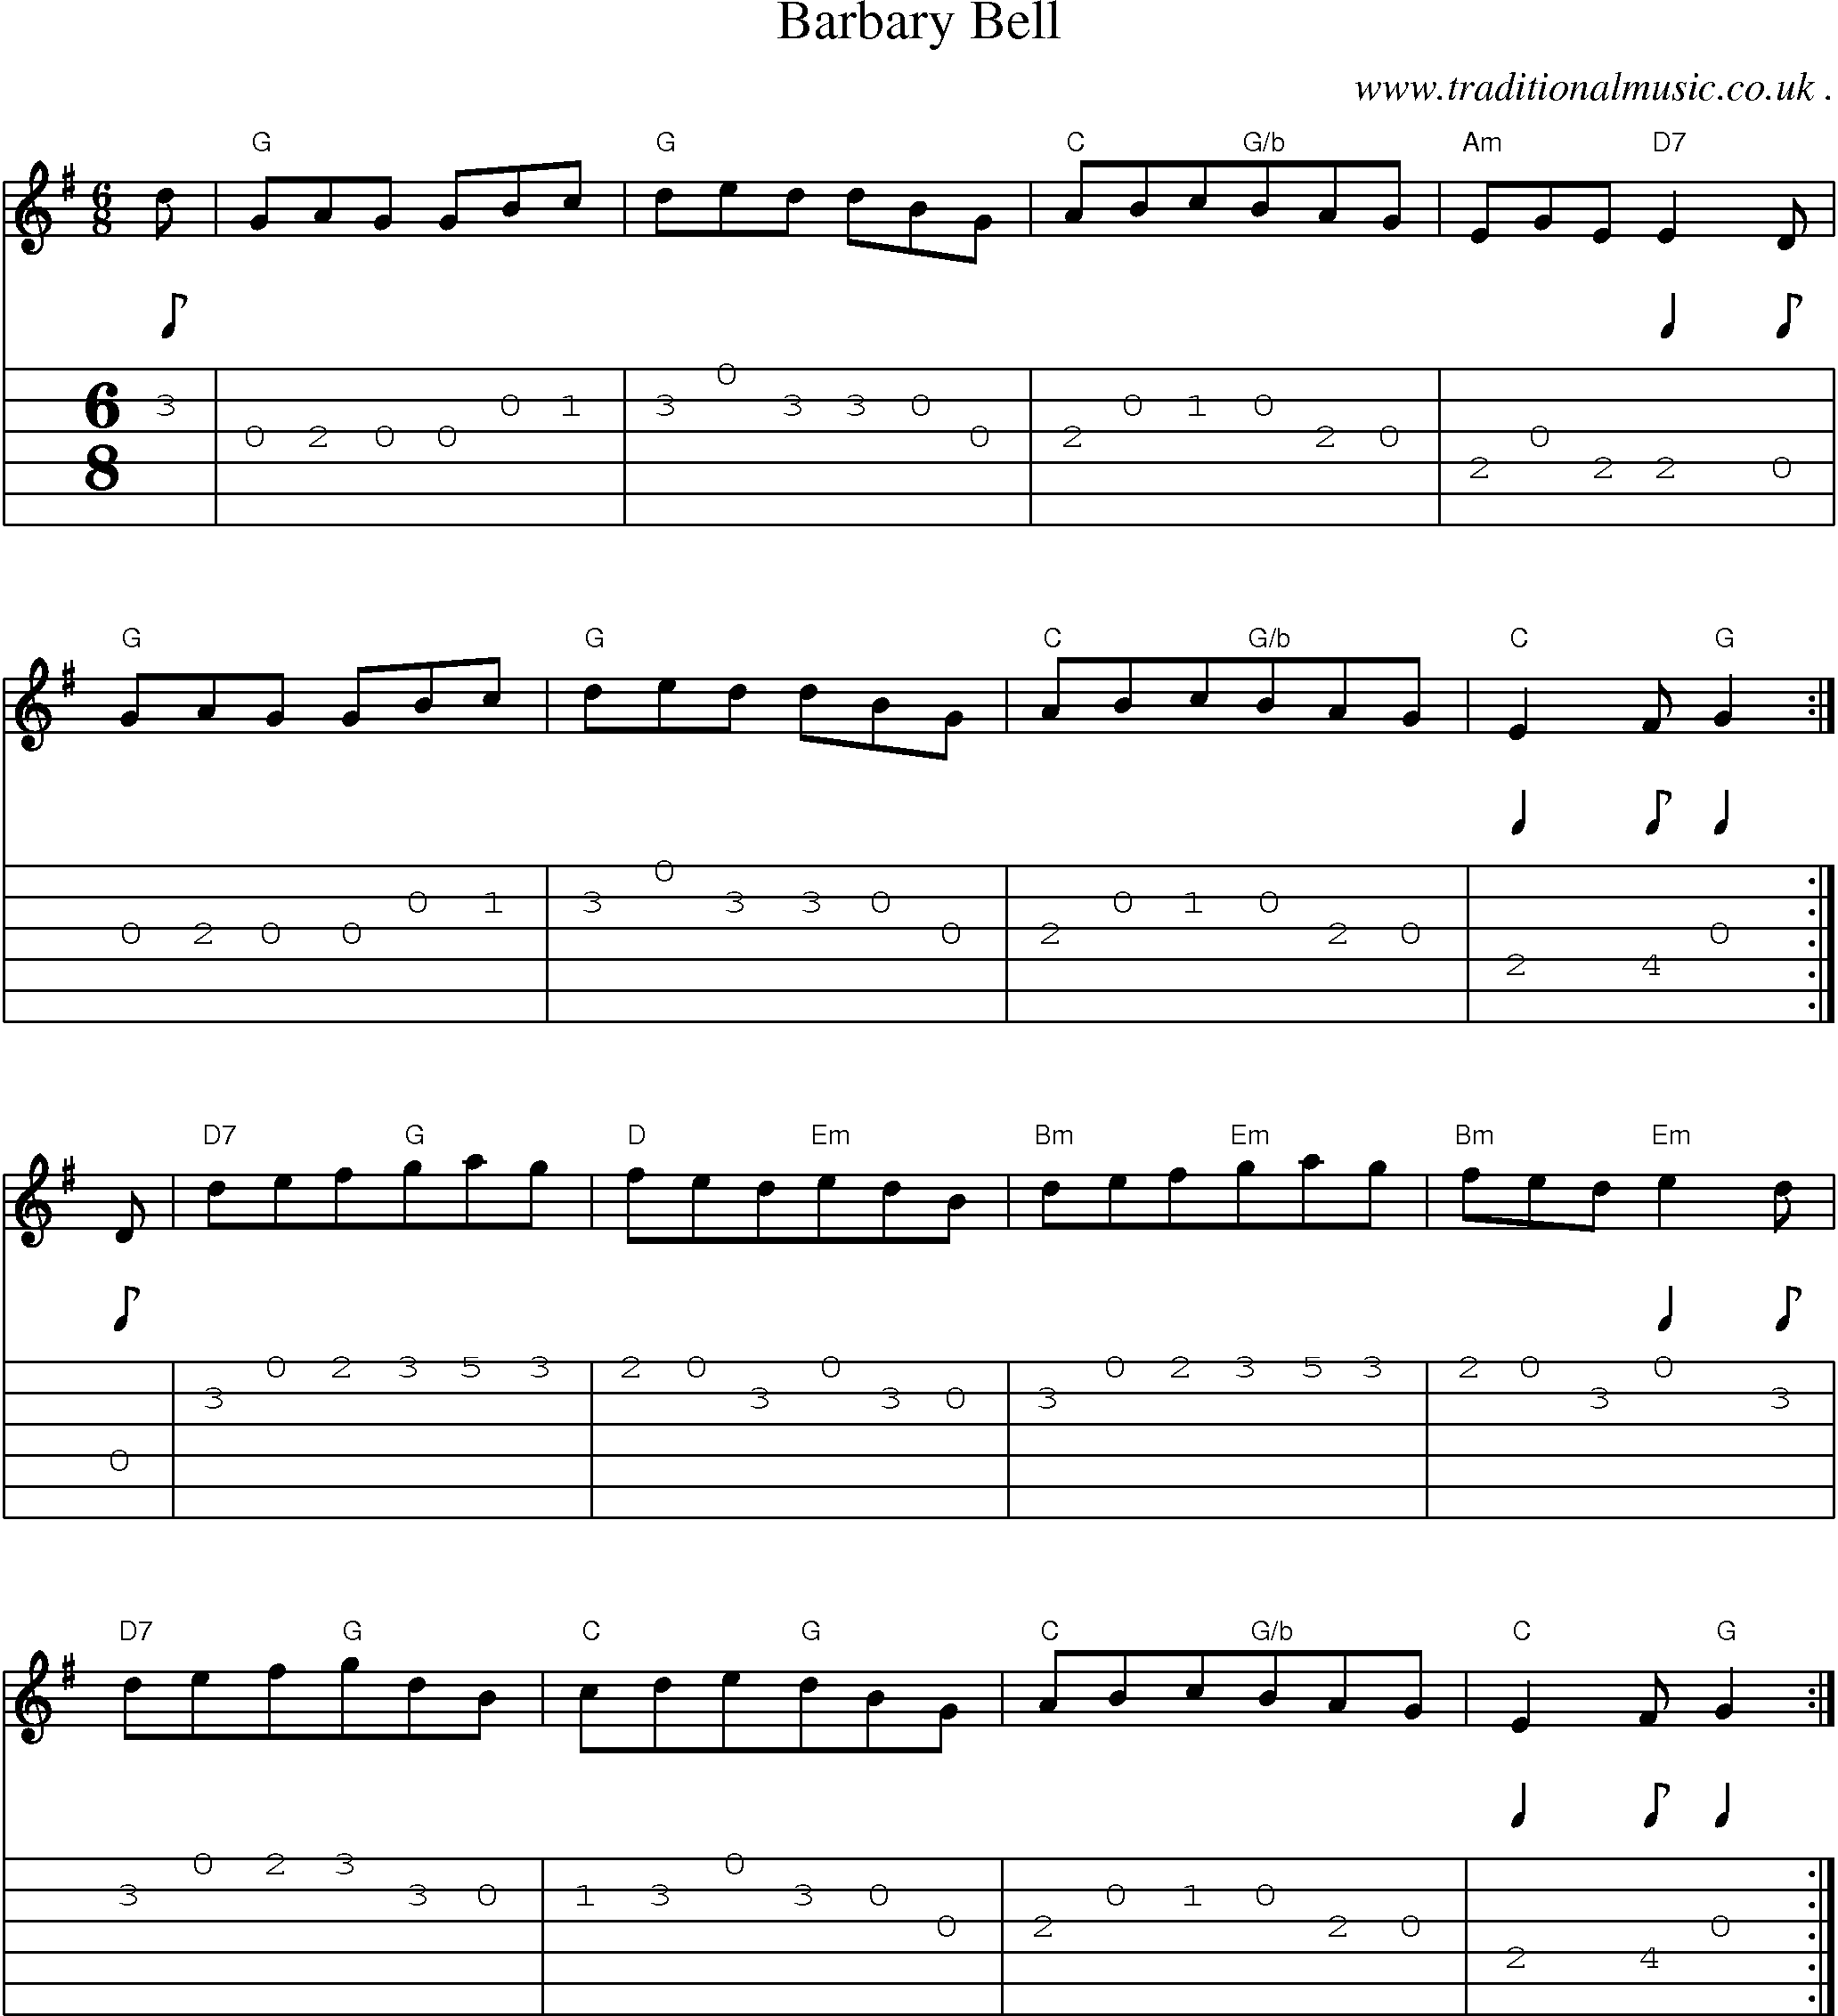 Sheet-Music and Guitar Tabs for Barbary Bell